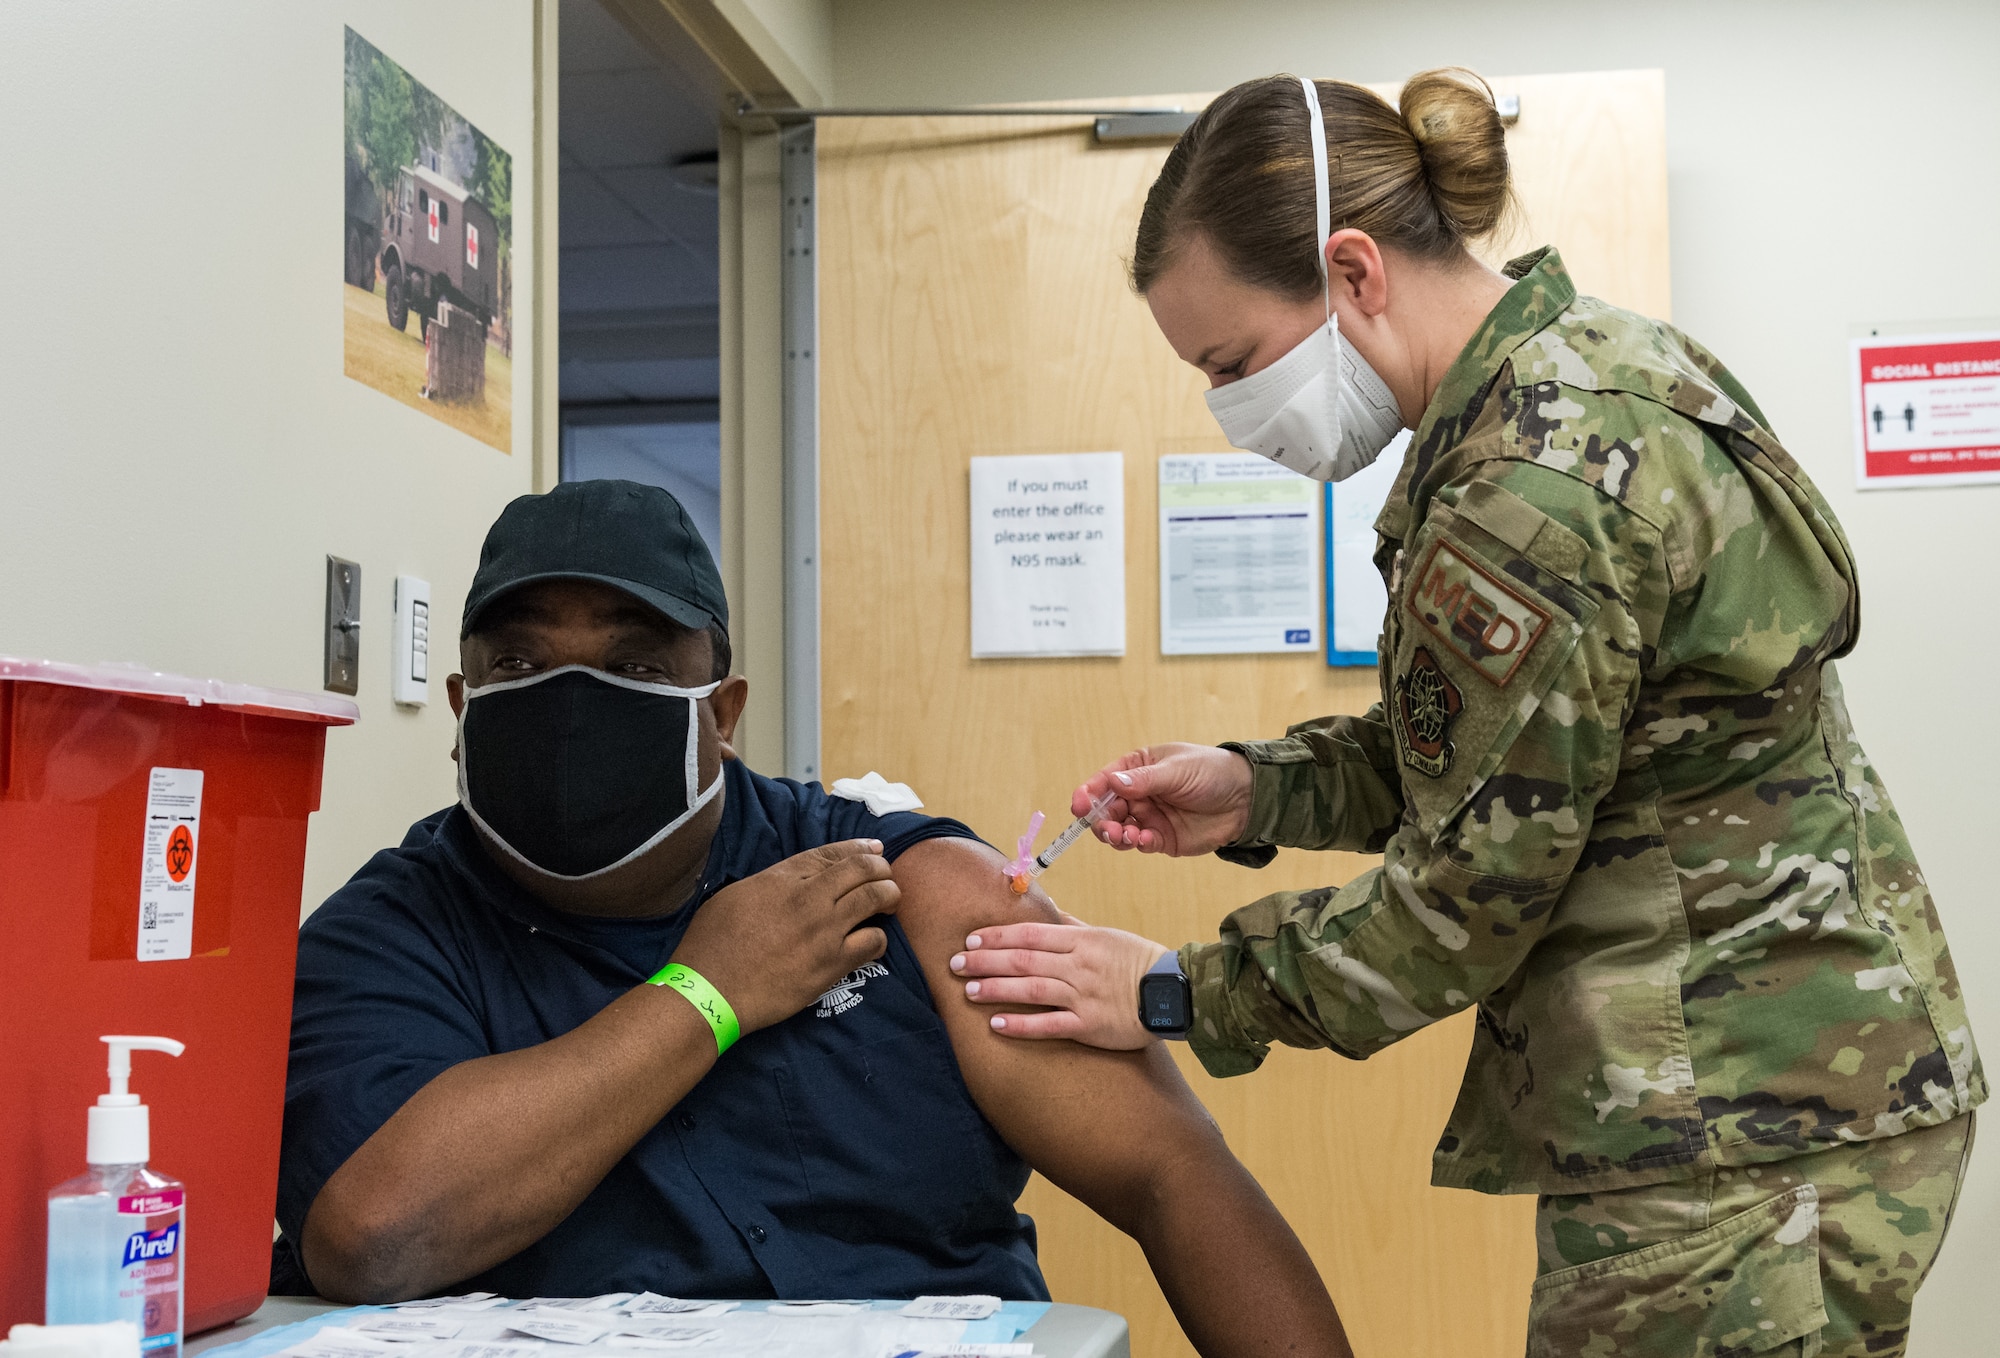 Henry Daniel, 436th Force Support Squadron material handler, is administered the COVID-19 vaccine by Staff Sgt. Kelsey Loeser, 436th Medical Group unit training manager, Jan. 22, 2021, at Dover Air Force Base, Delaware. Daniel was among the first Team Dover front-line workers who voluntarily received the vaccine in accordance with Department of Defense guidance. The vaccine was granted emergency use authorization by the U.S. Food and Drug Administration for use in prevention of COVID-19. (U.S. Air Force photo by Roland Balik)